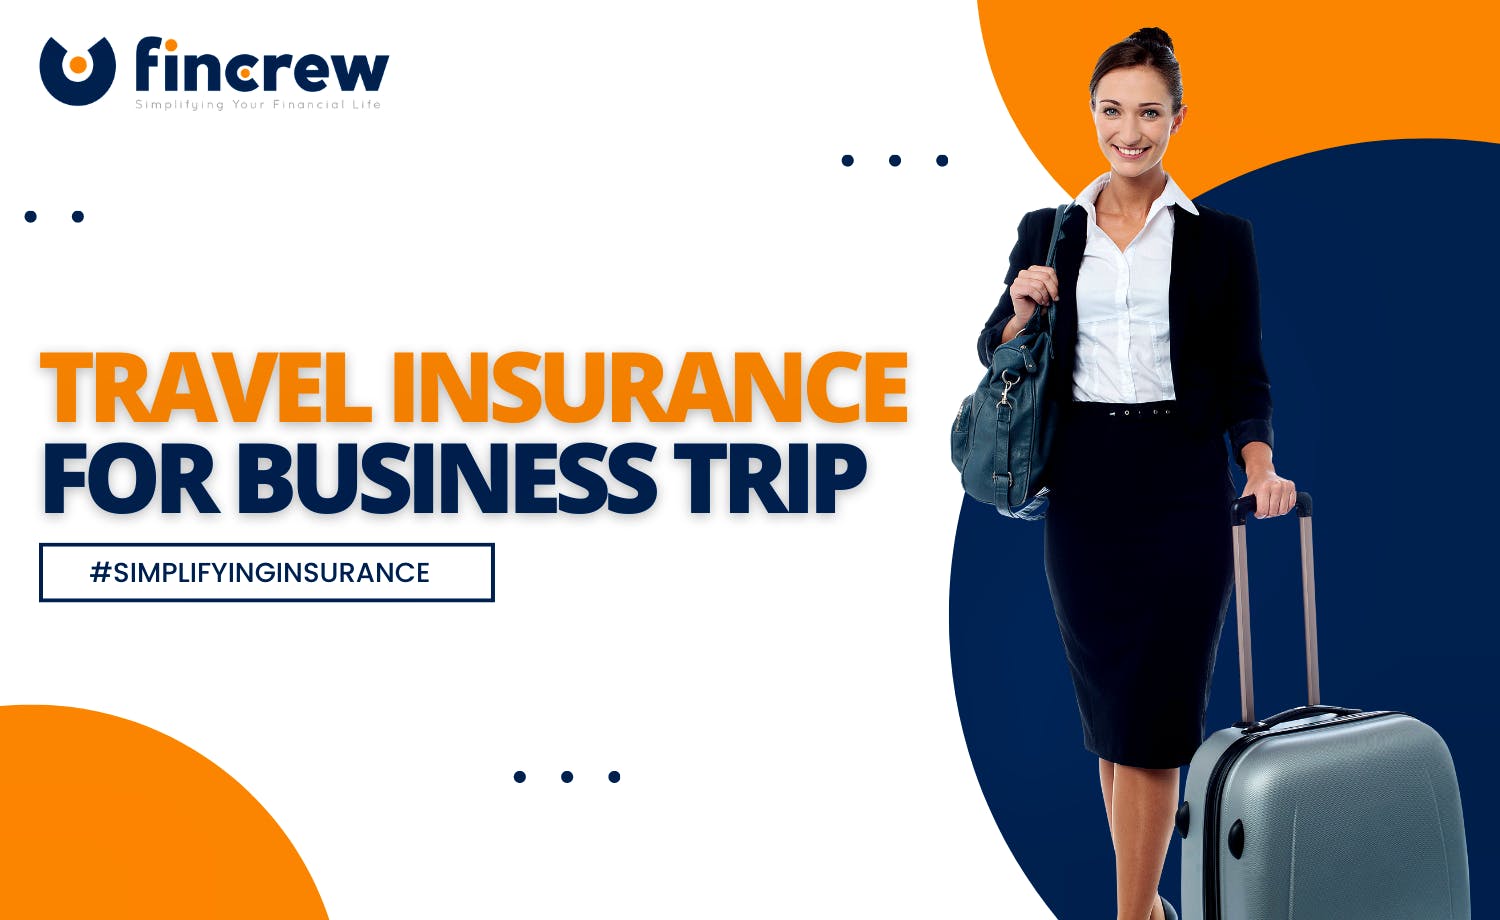 Travel Insurance To Cover Your Business Trip